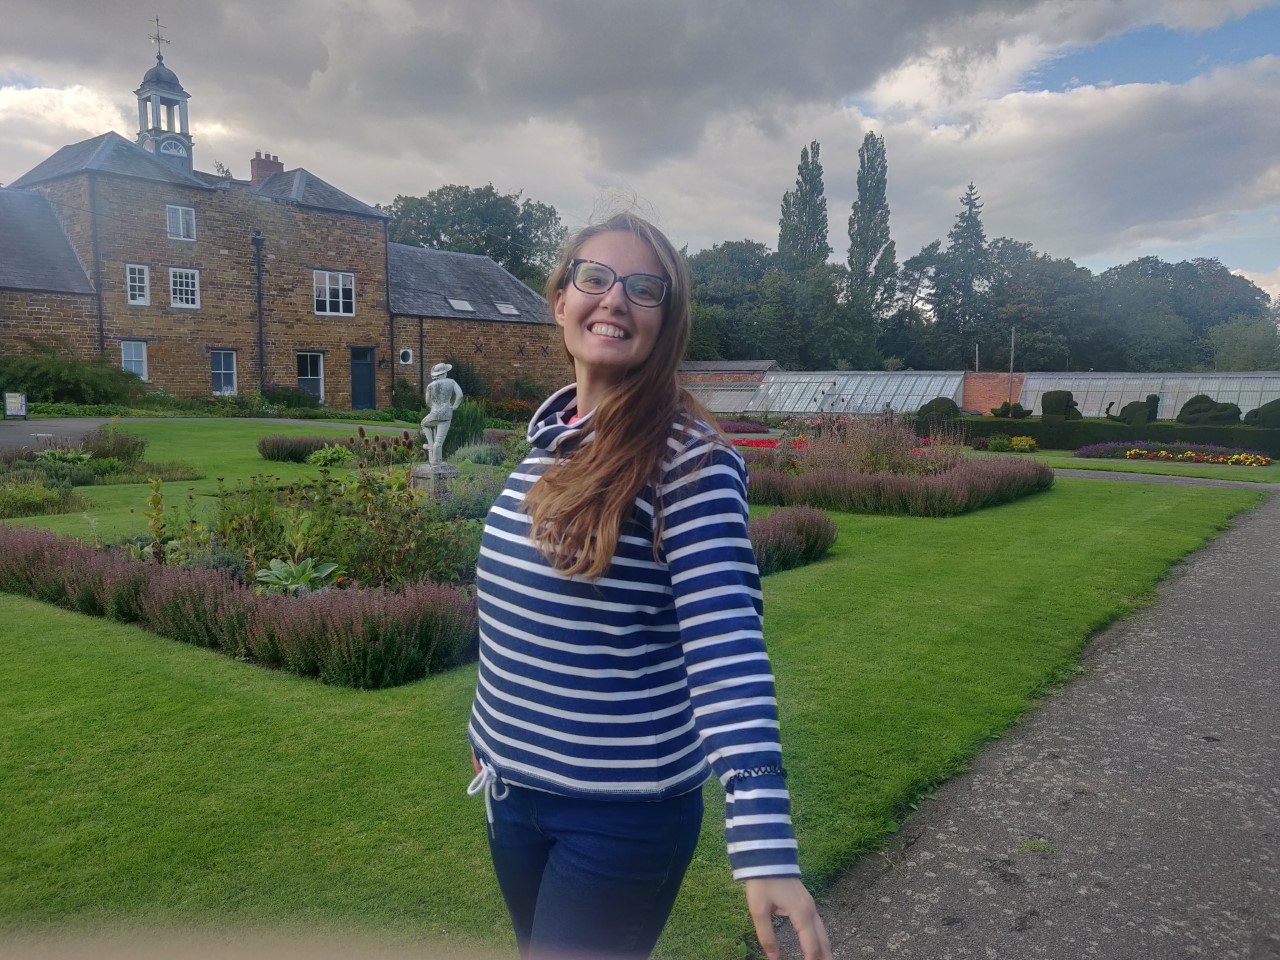 A young woman is smiling in a large garden. She is smiling at the camera.